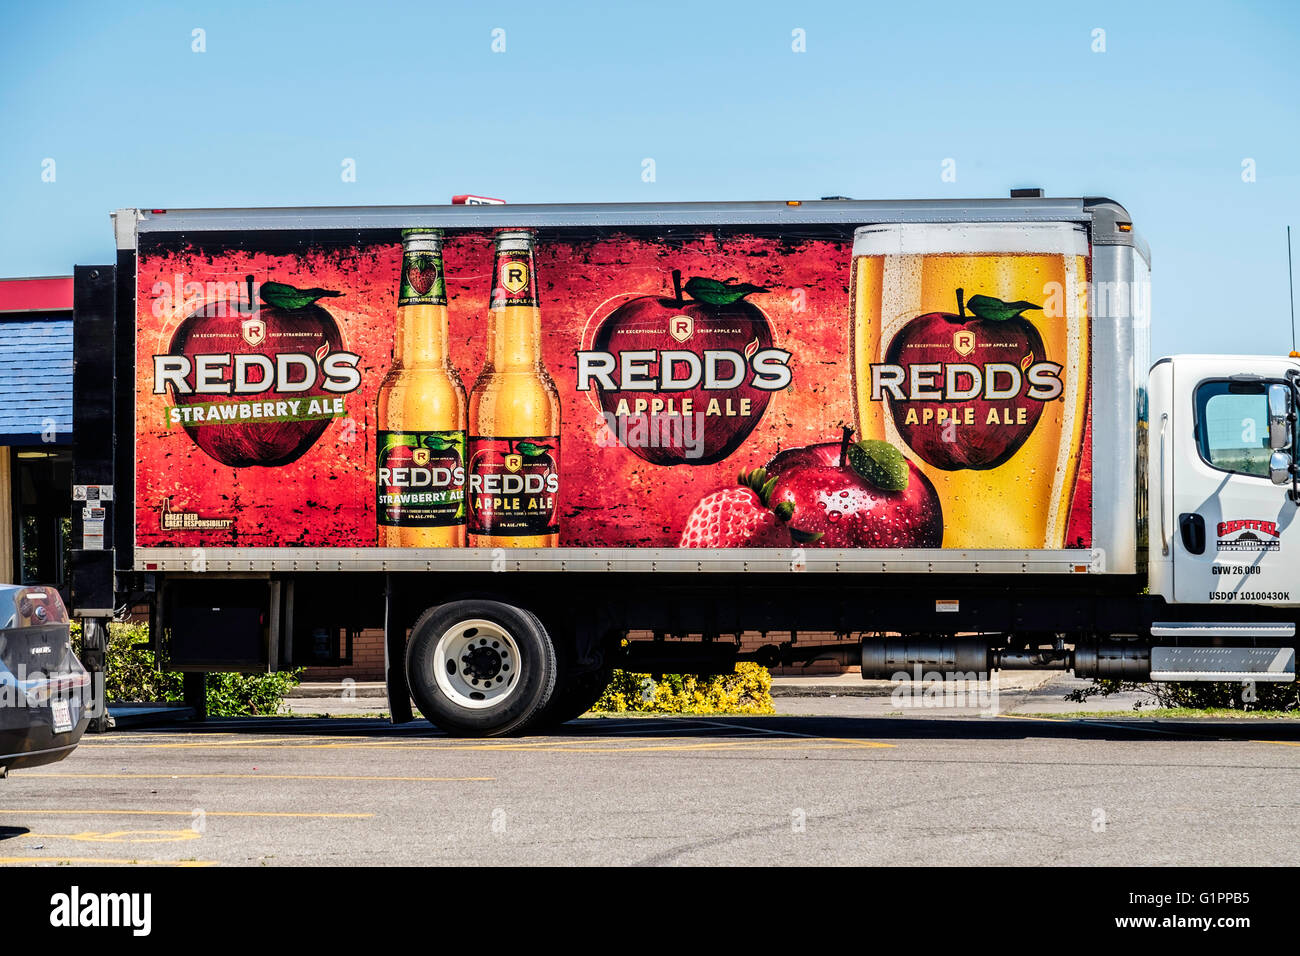 Transport truck advertising the music of Taylor Swift, Kelly